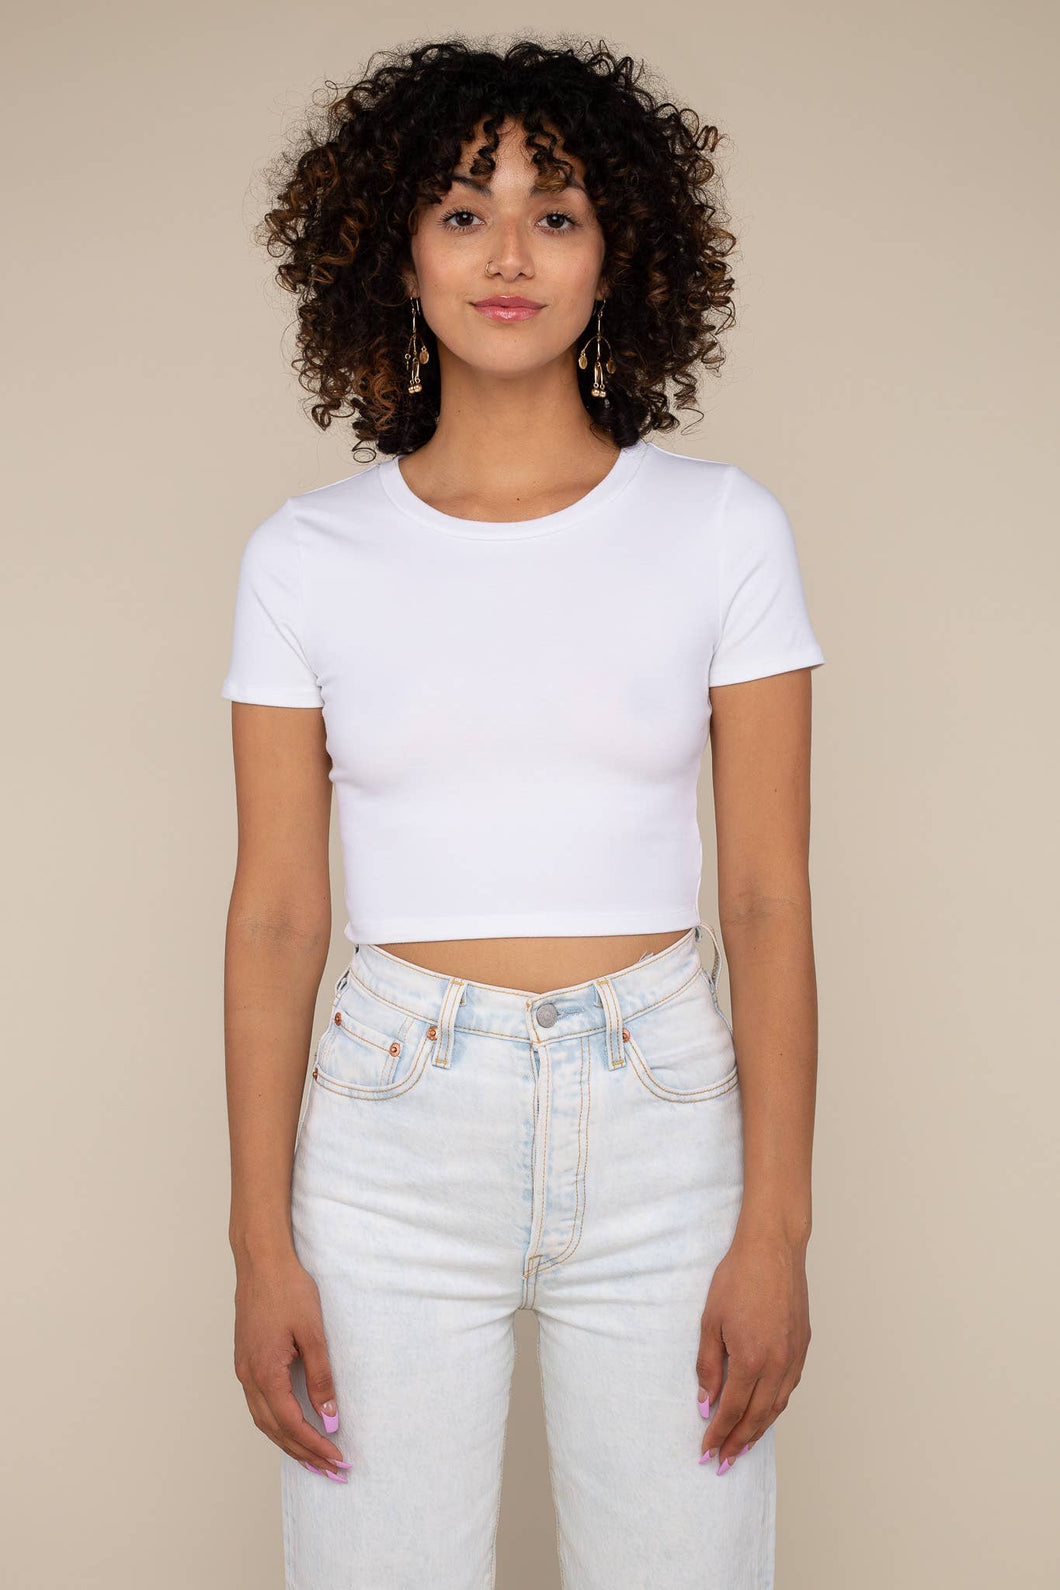 90's Cropped Baby Tee